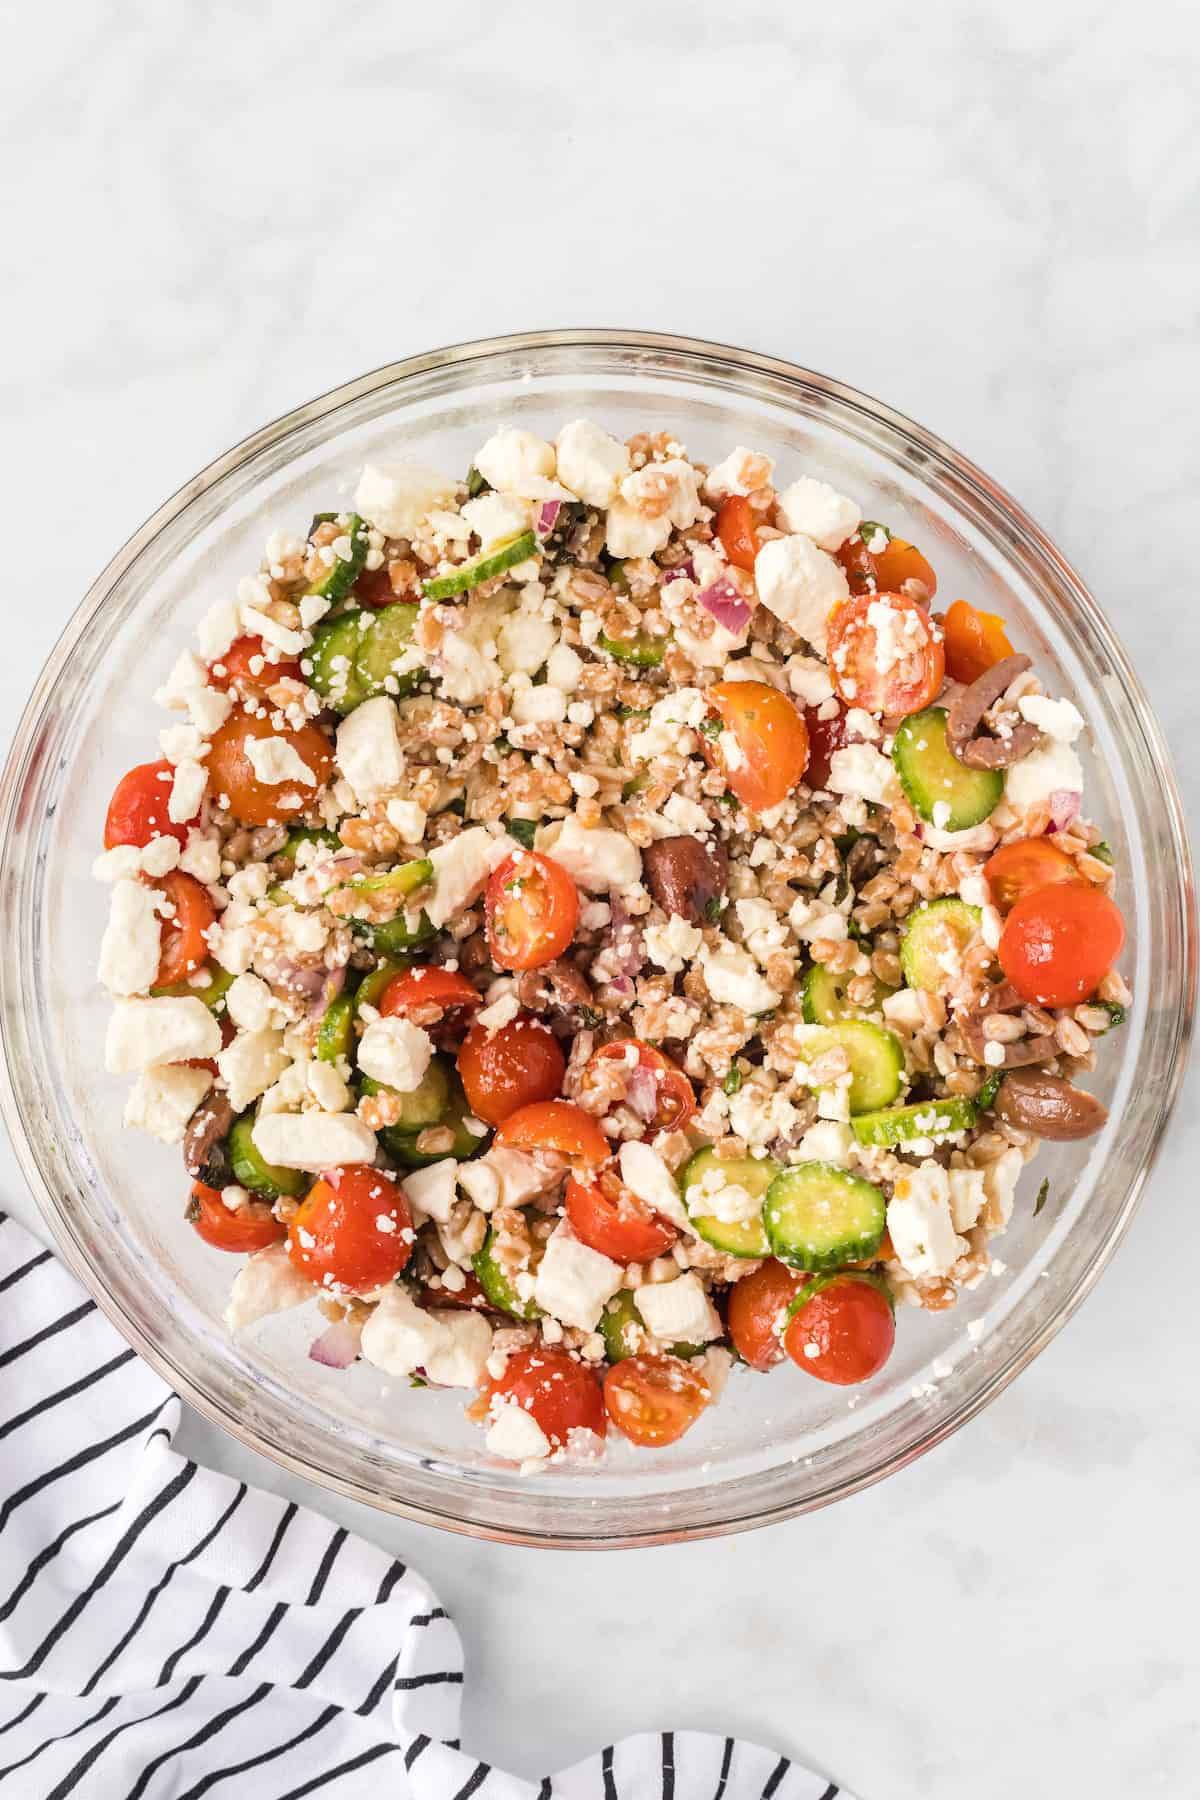 the farro salad with fresh vegetables and feta cheese.